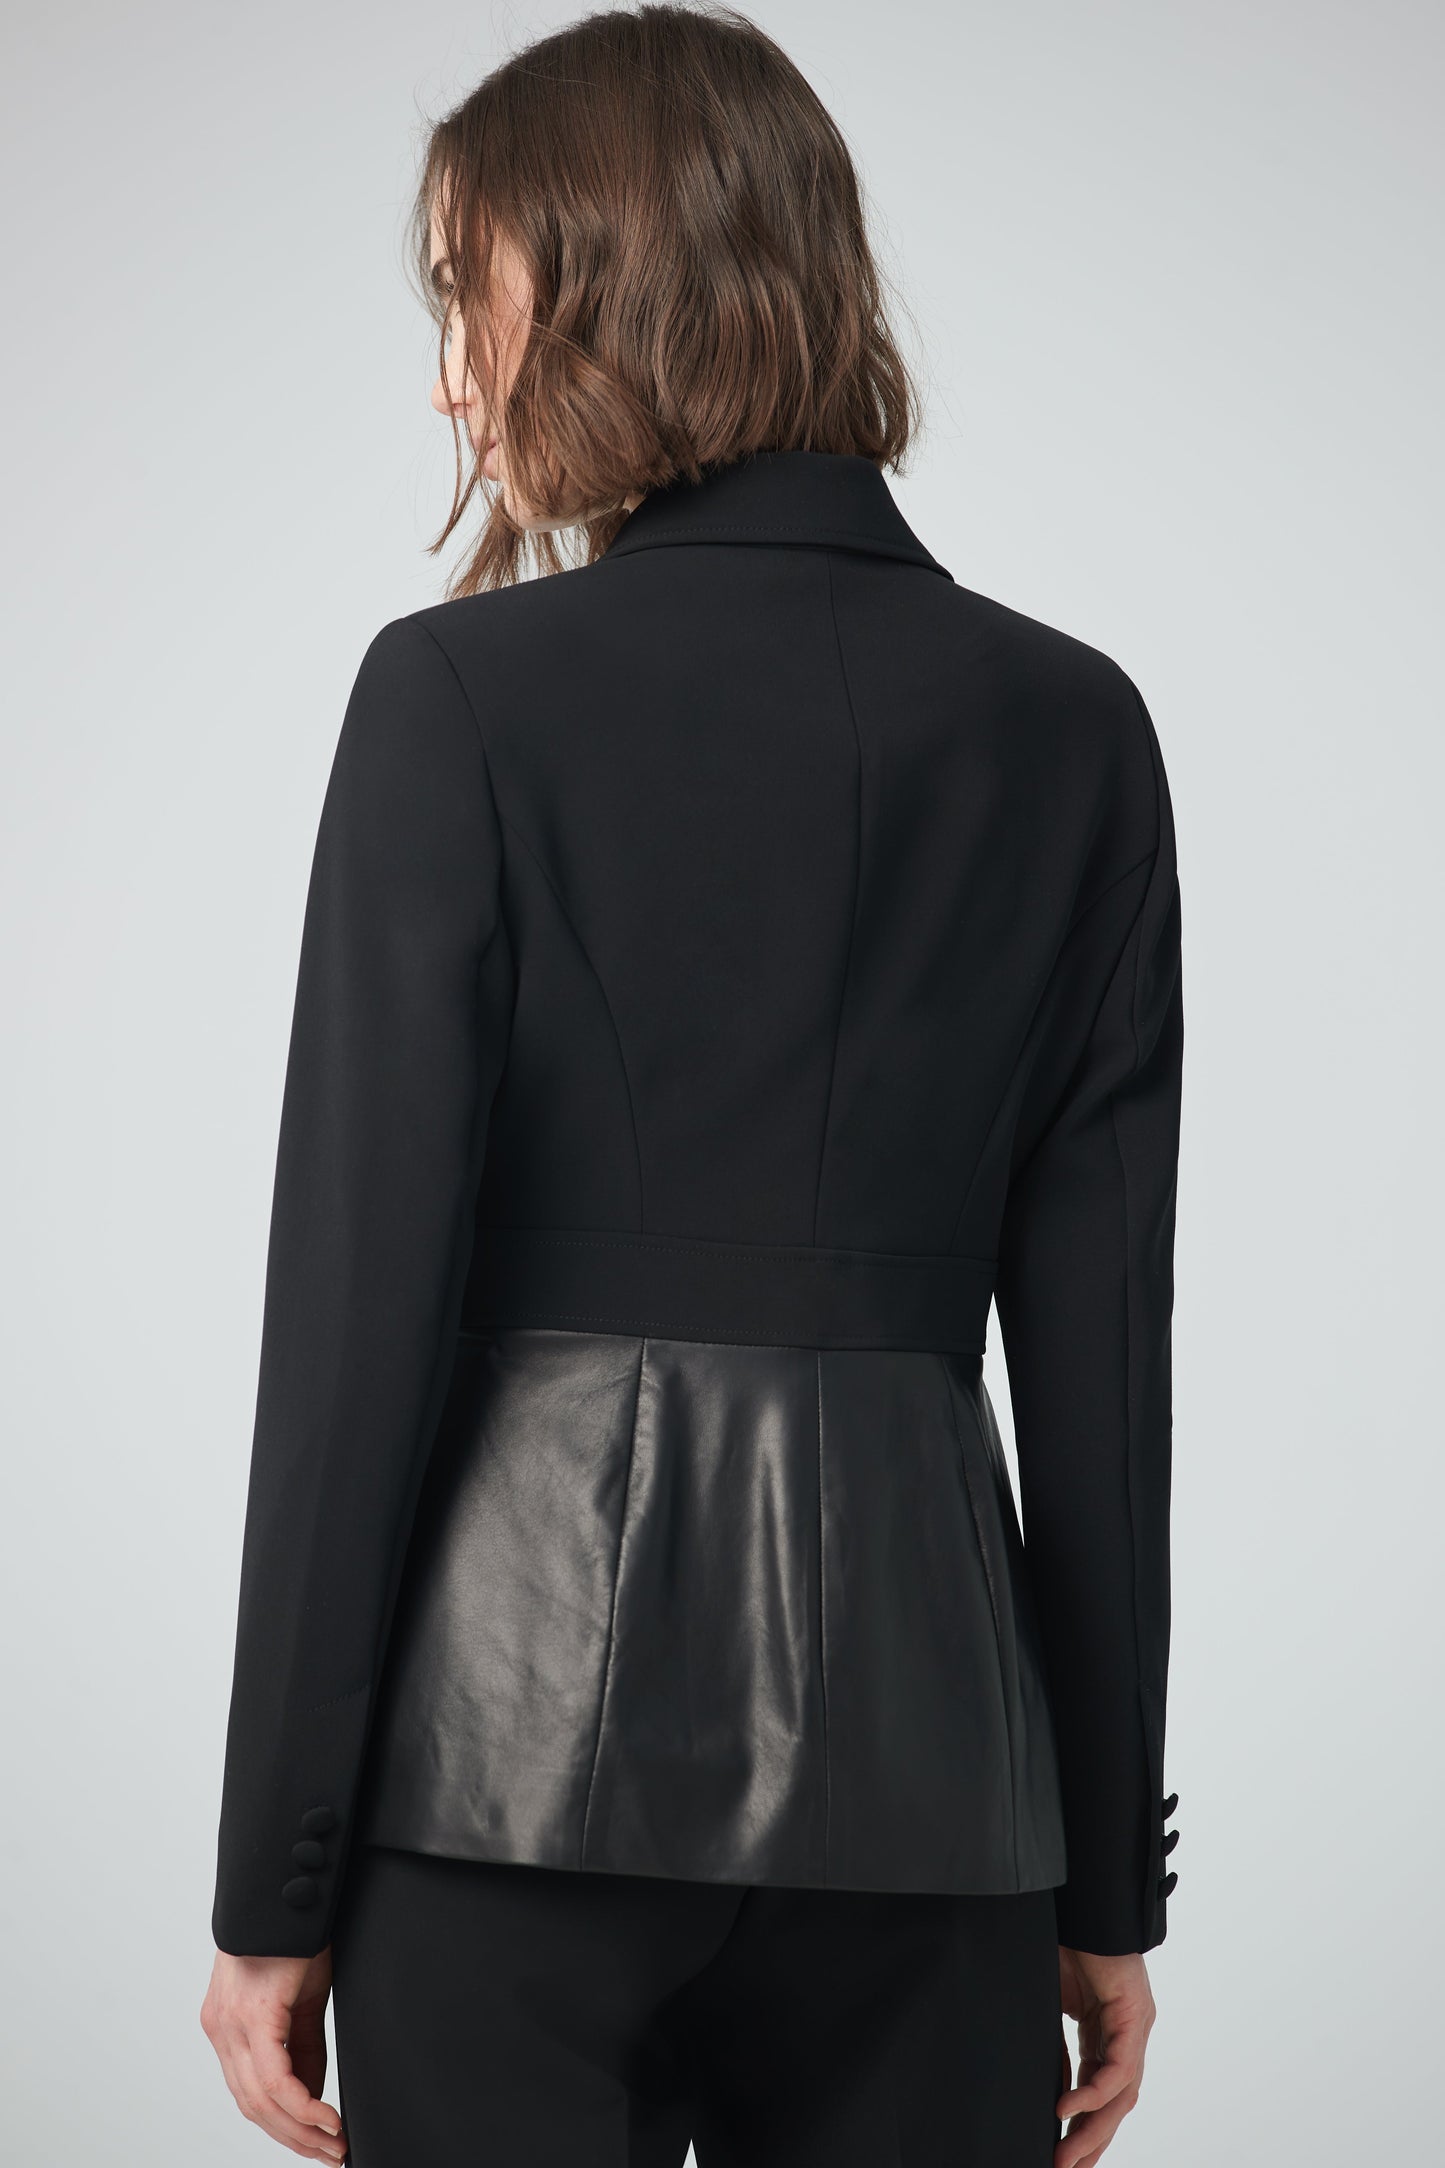 Jacket with leather basque